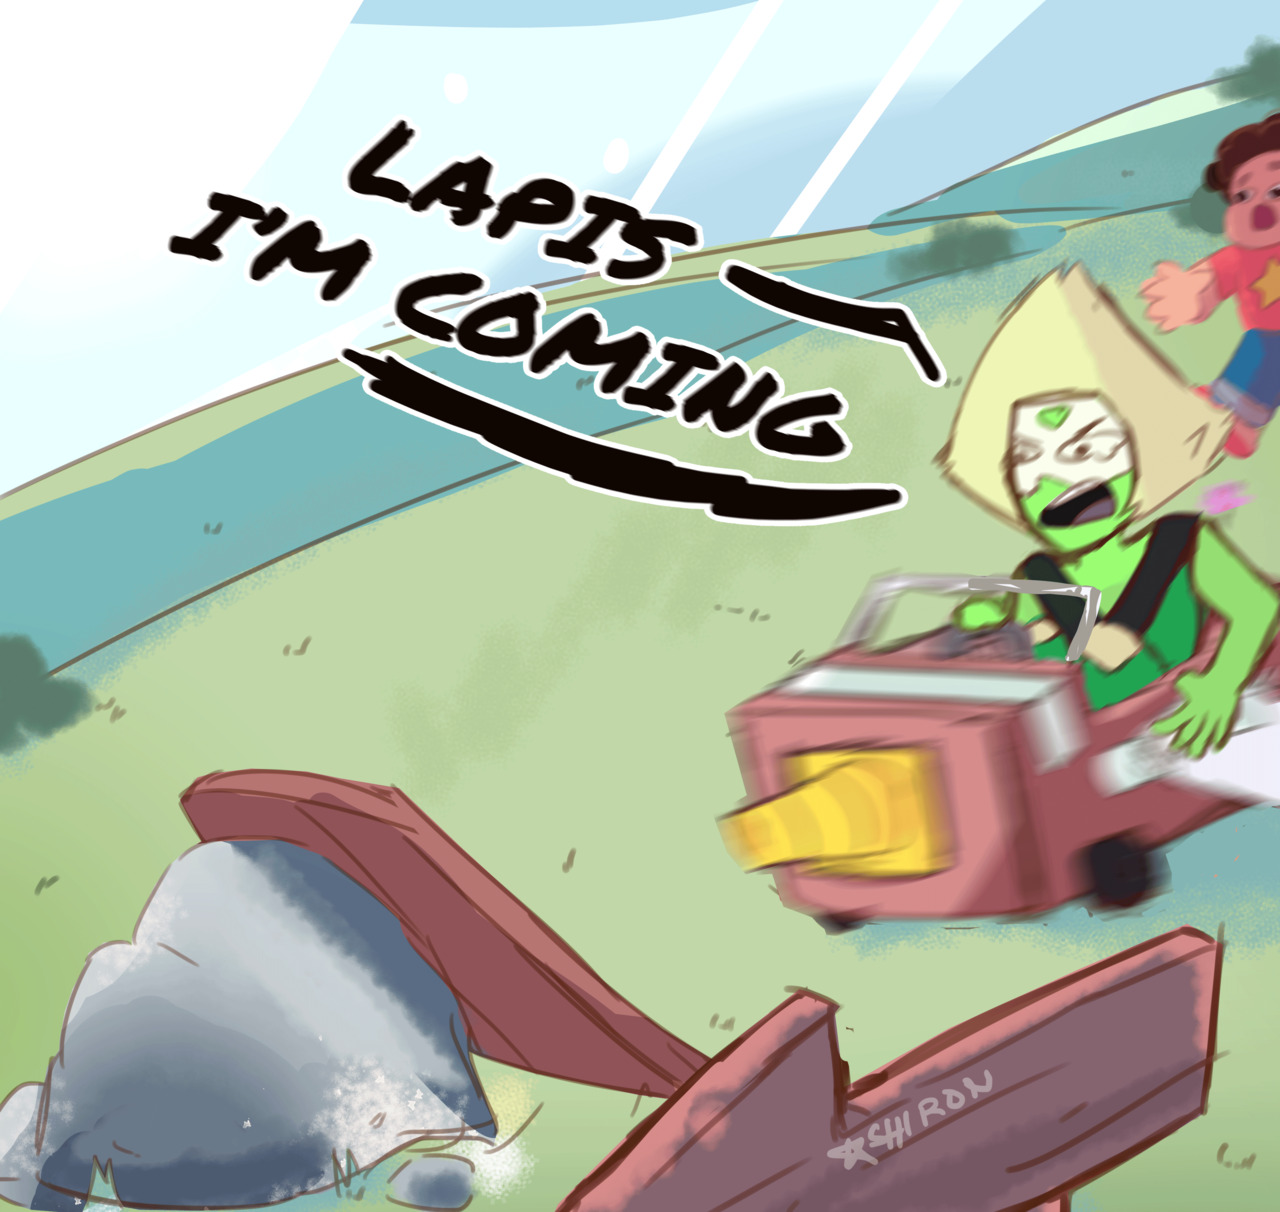 Peridot trying to go to the moon. ‘Cause Lion is too tired.